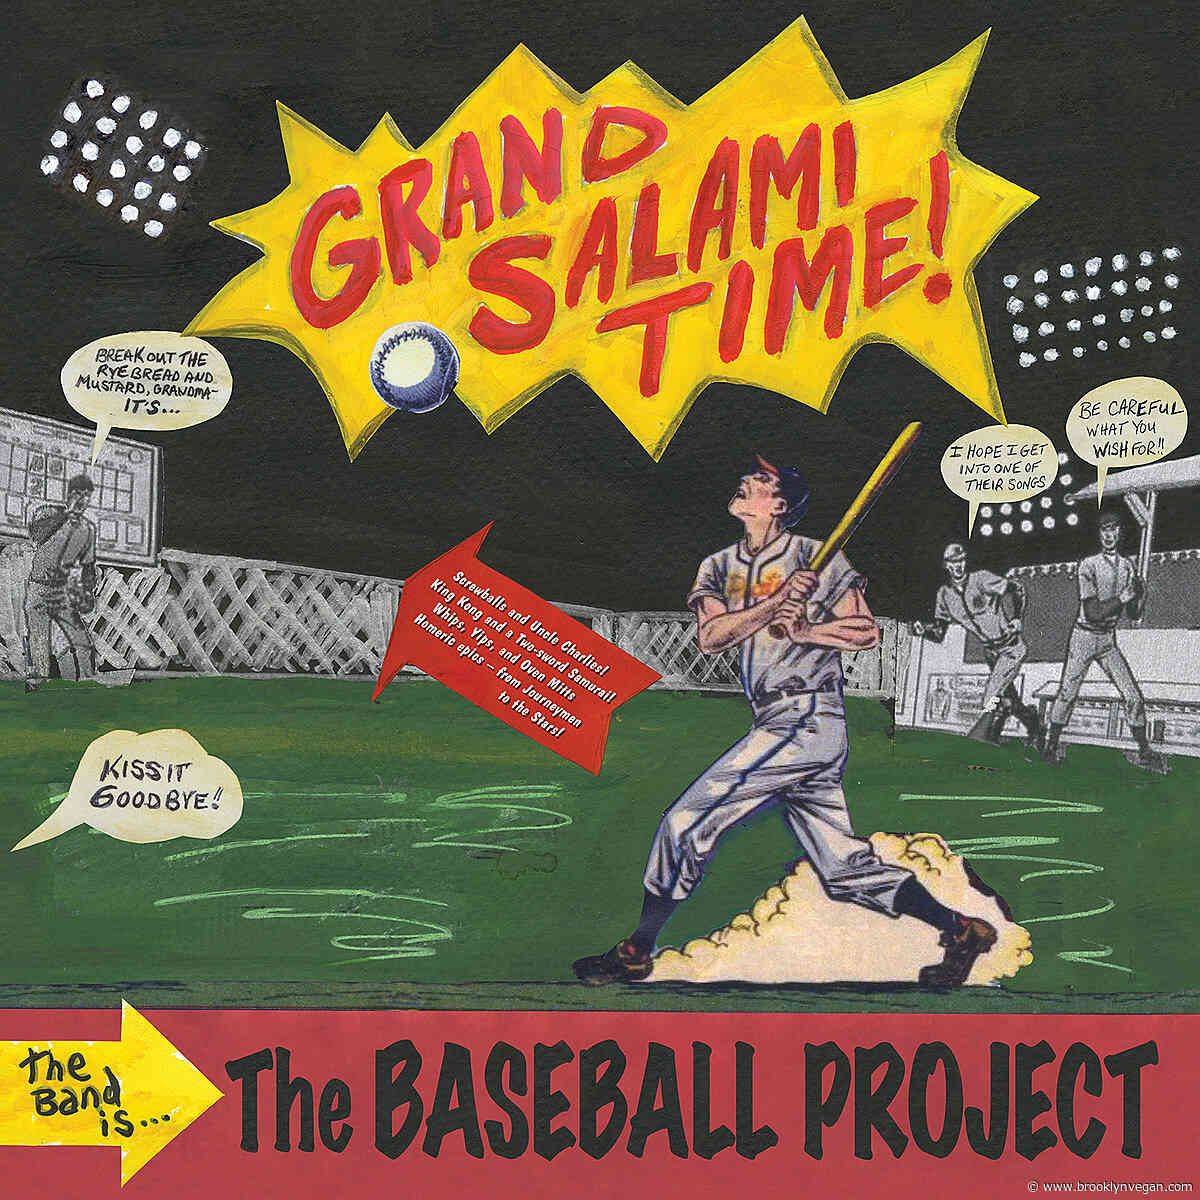 The Baseball Project detail new album, share Journeyman, add more tour